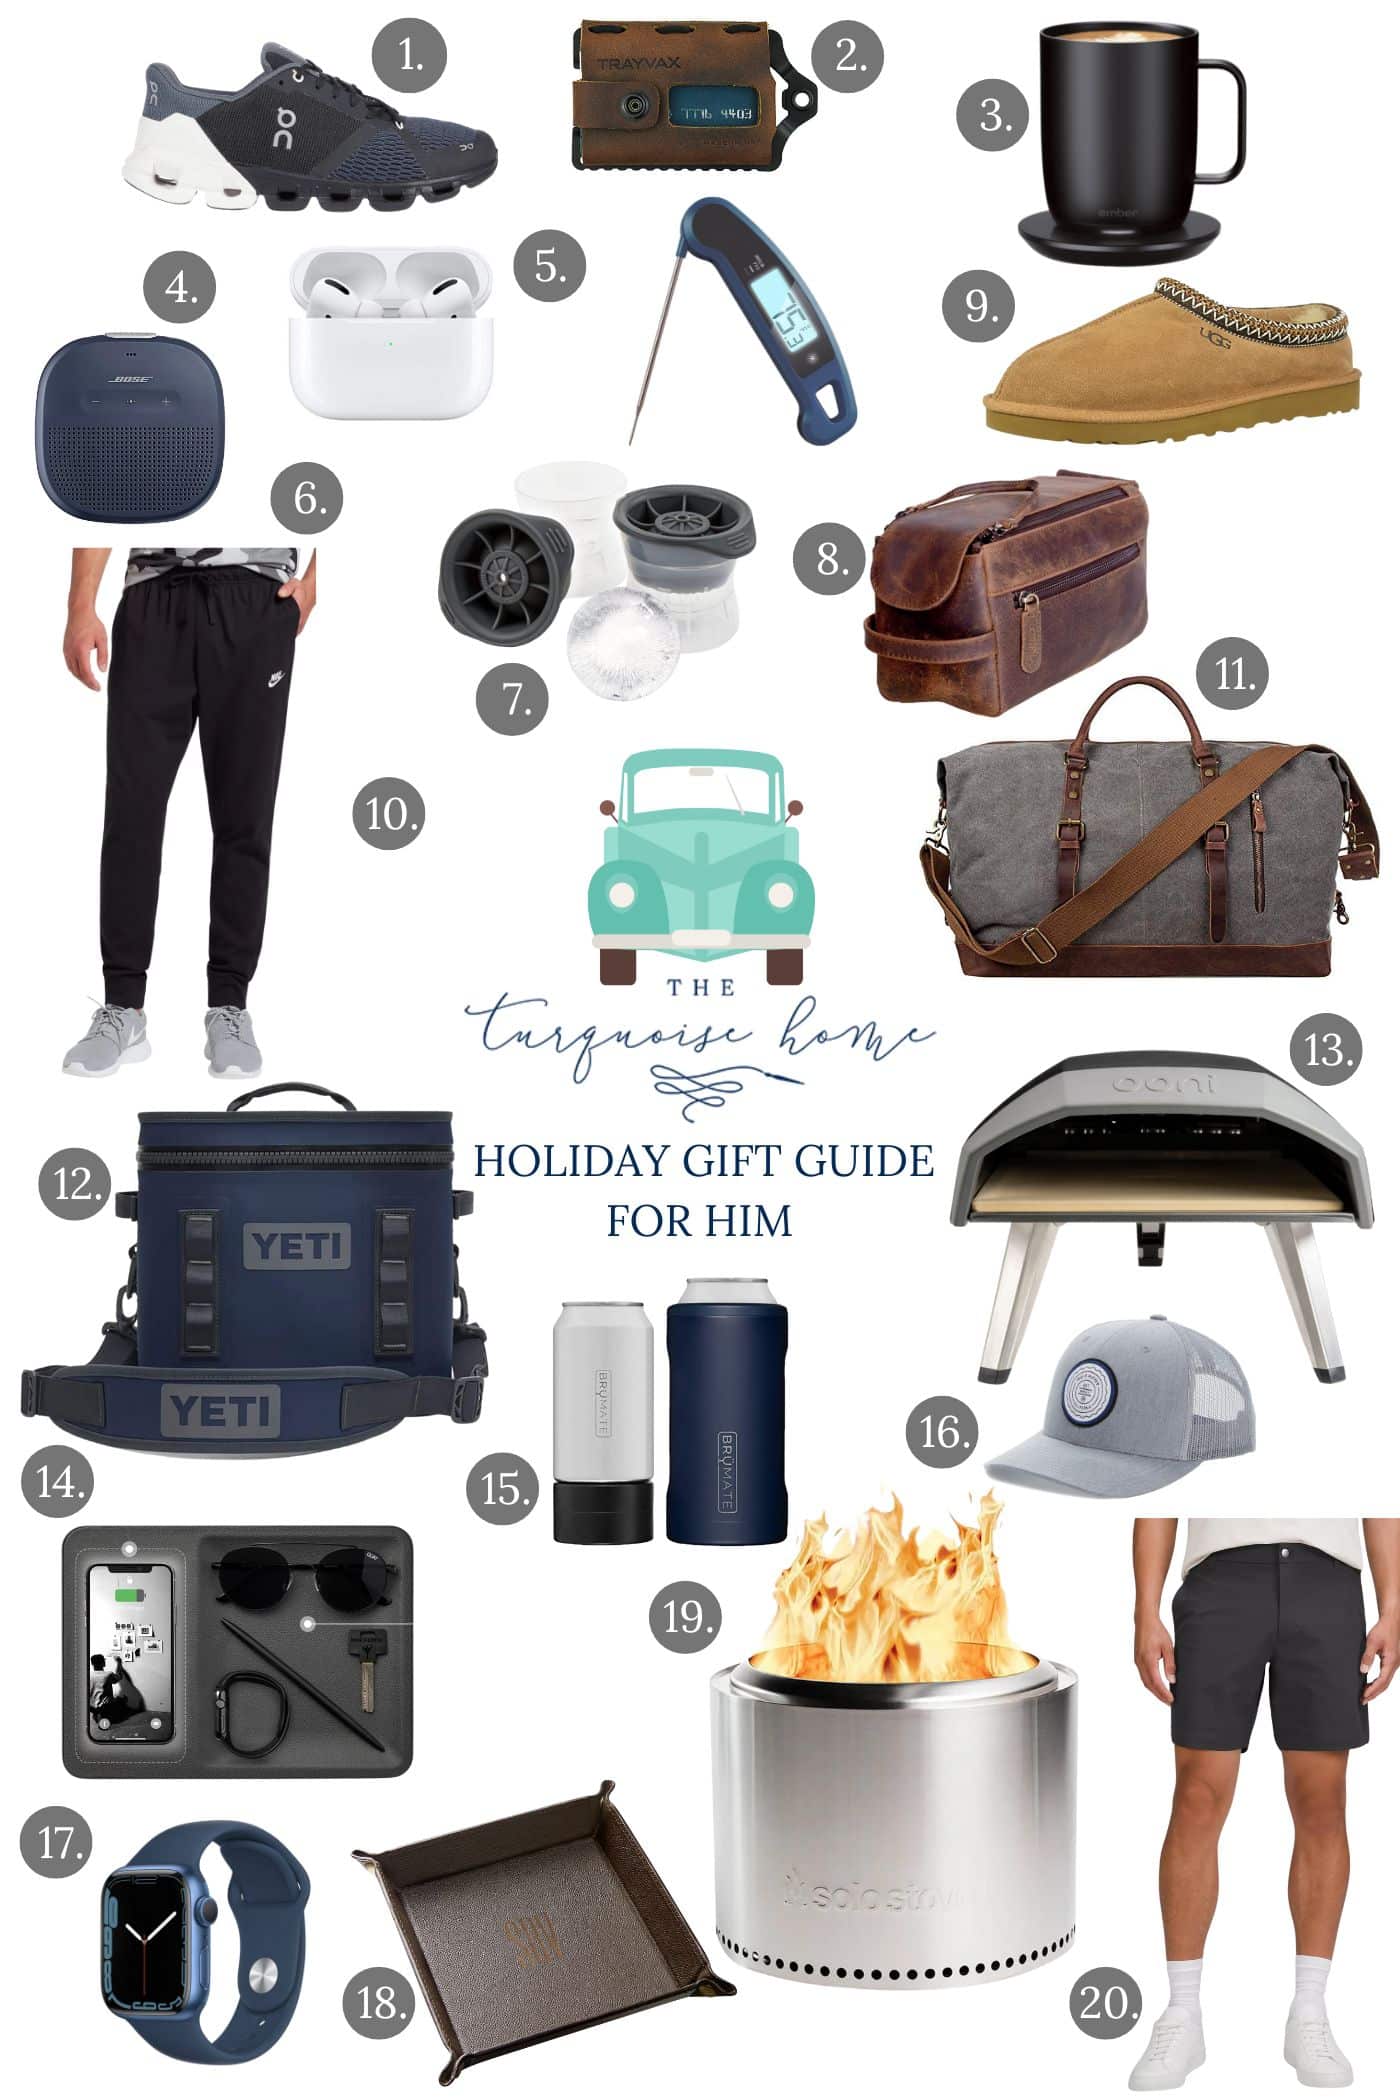 Gift Guide for Men - The Turquoise Home